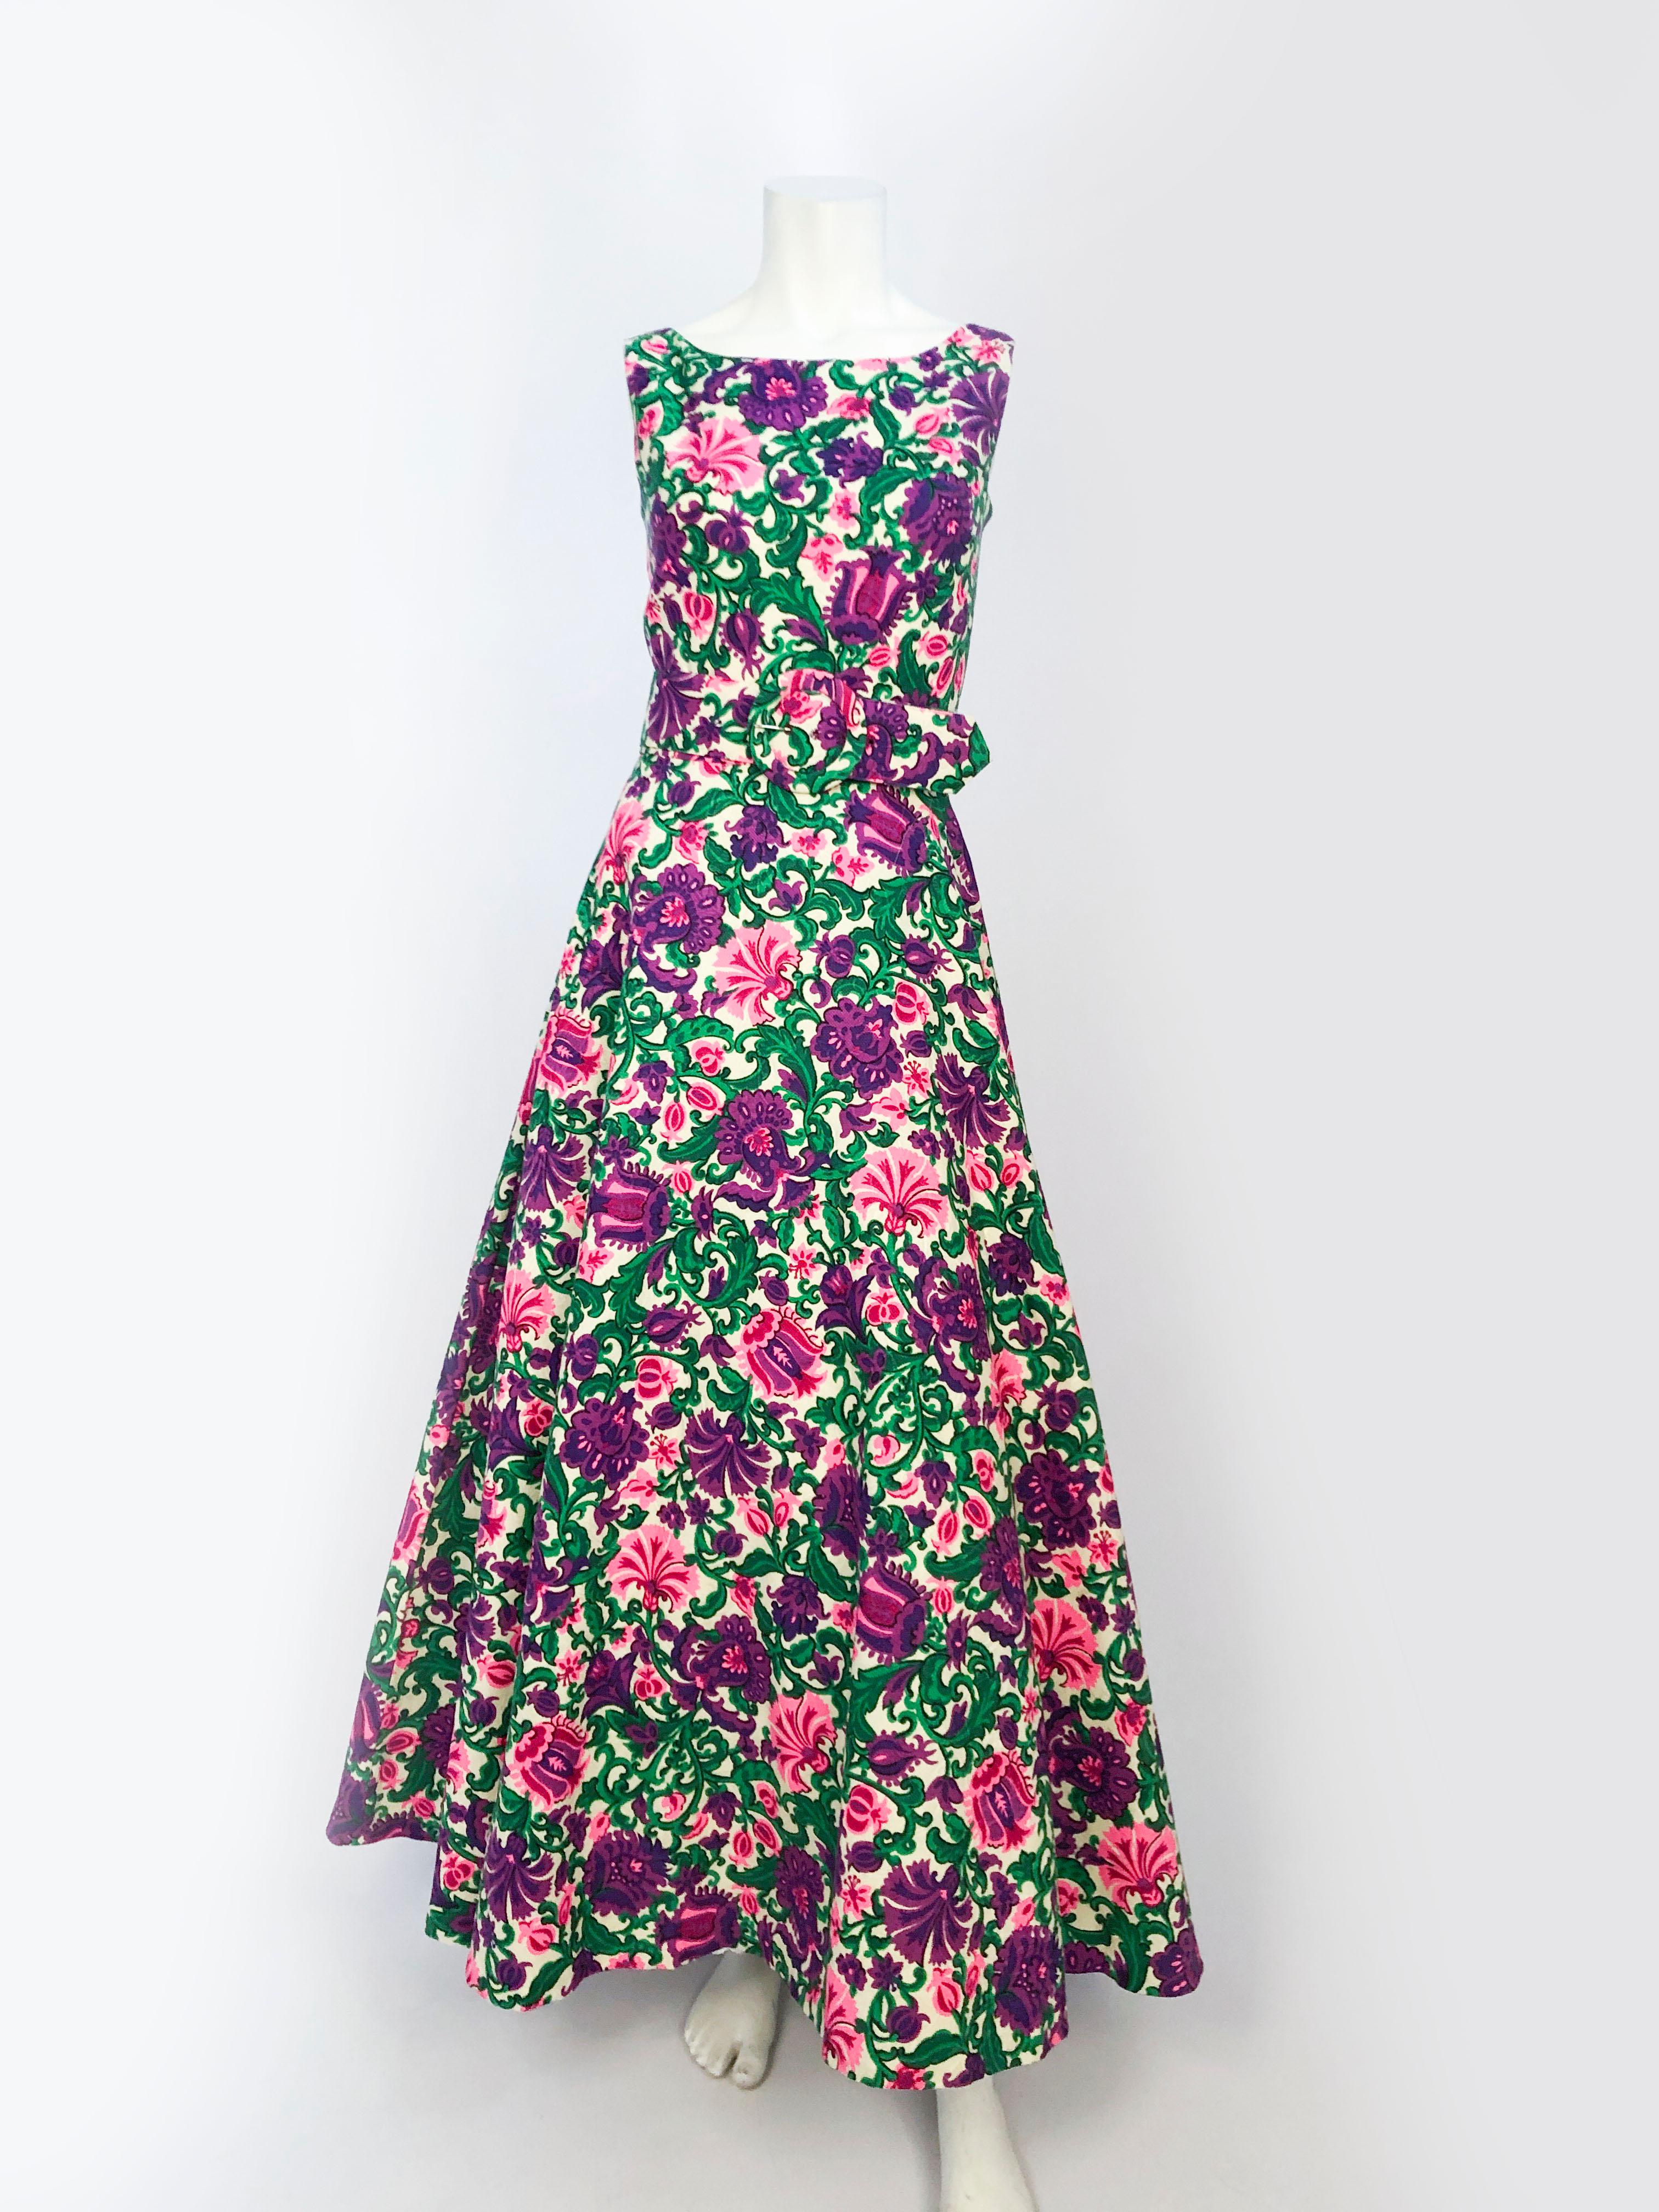 1960's vibrantly printed dress featuring a floral pattern on jacquard. This dress has a scoop neckline, a full skirt, matching belt, and a low back zipper closure. This dress was styled with a petticoat that is not included with the dress.